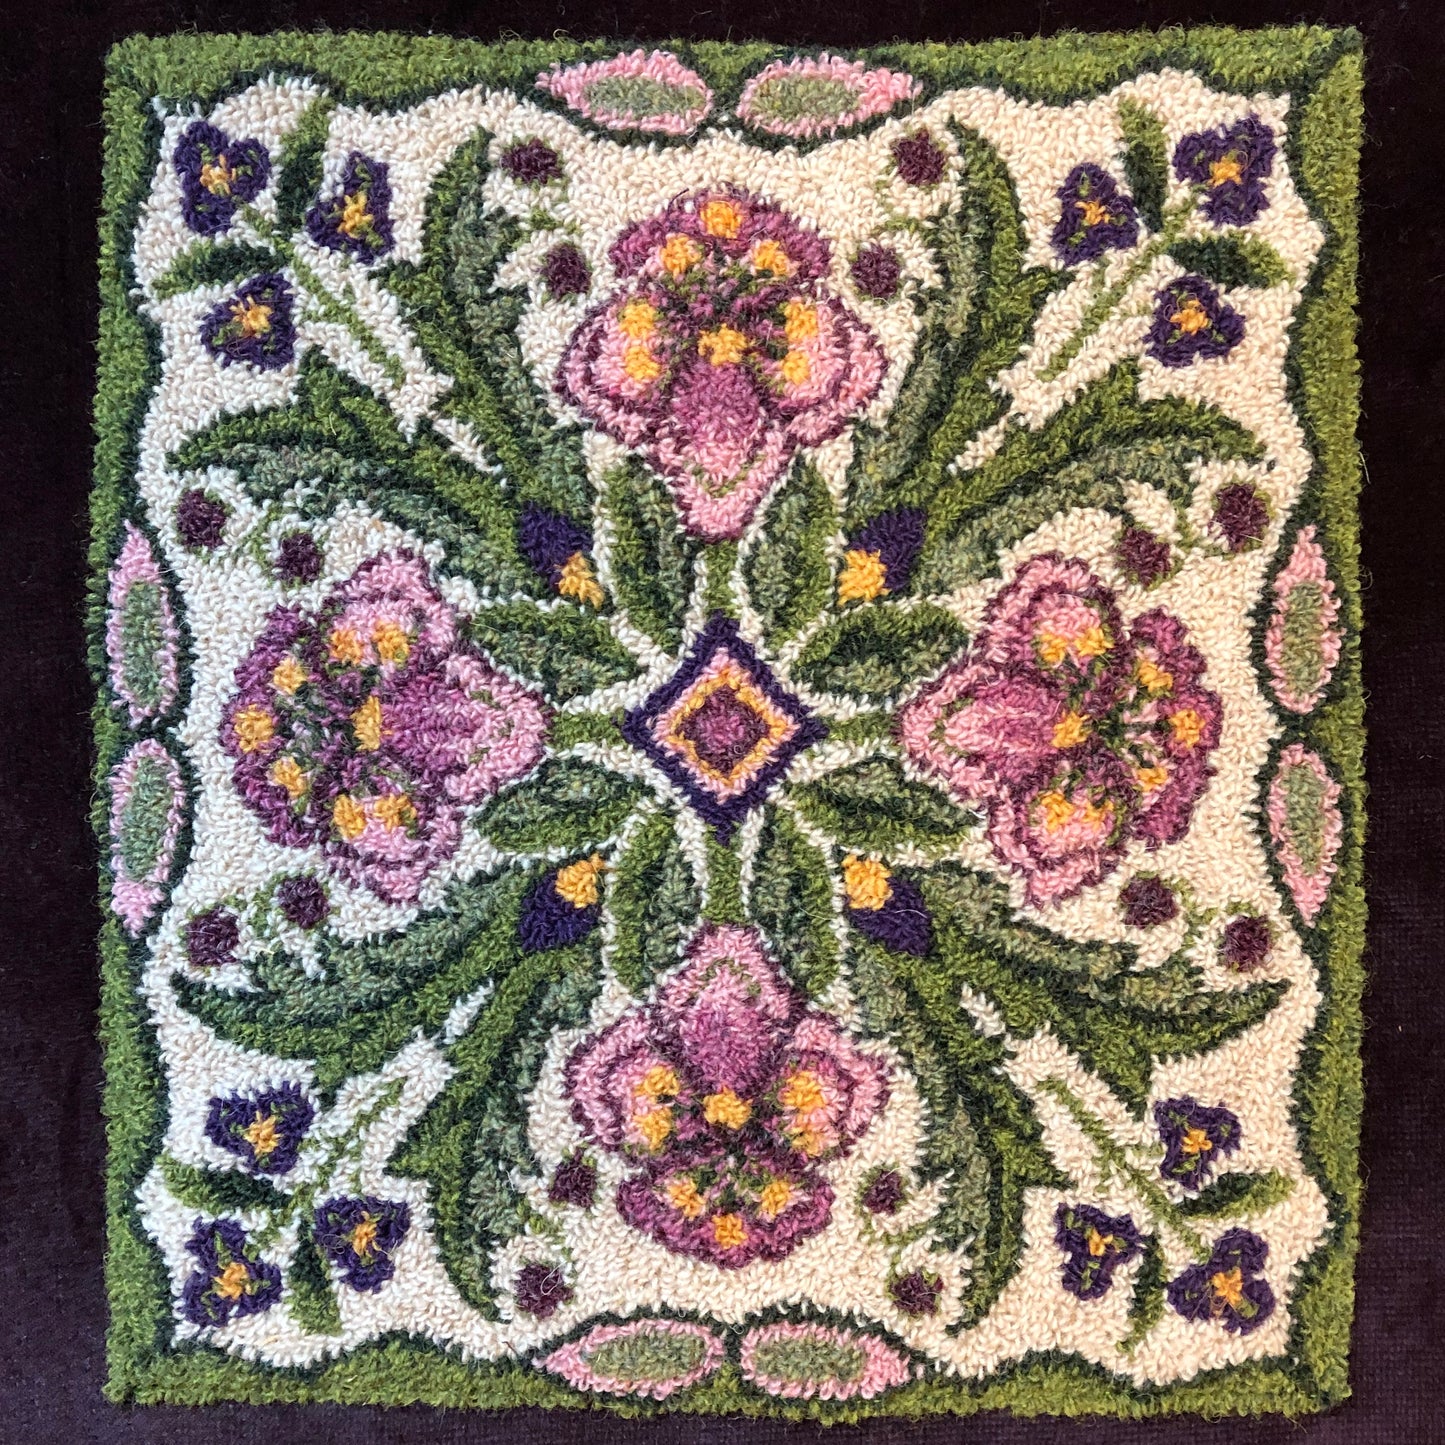 Lovely Rug Hooking Pattern is hand drawn on Linen, by Orphaned Wool. This pattern is perfect of the Rug Hooking and Rug Punch Needle artist. This Floral Design makes a stunning pillow or wall hanging.